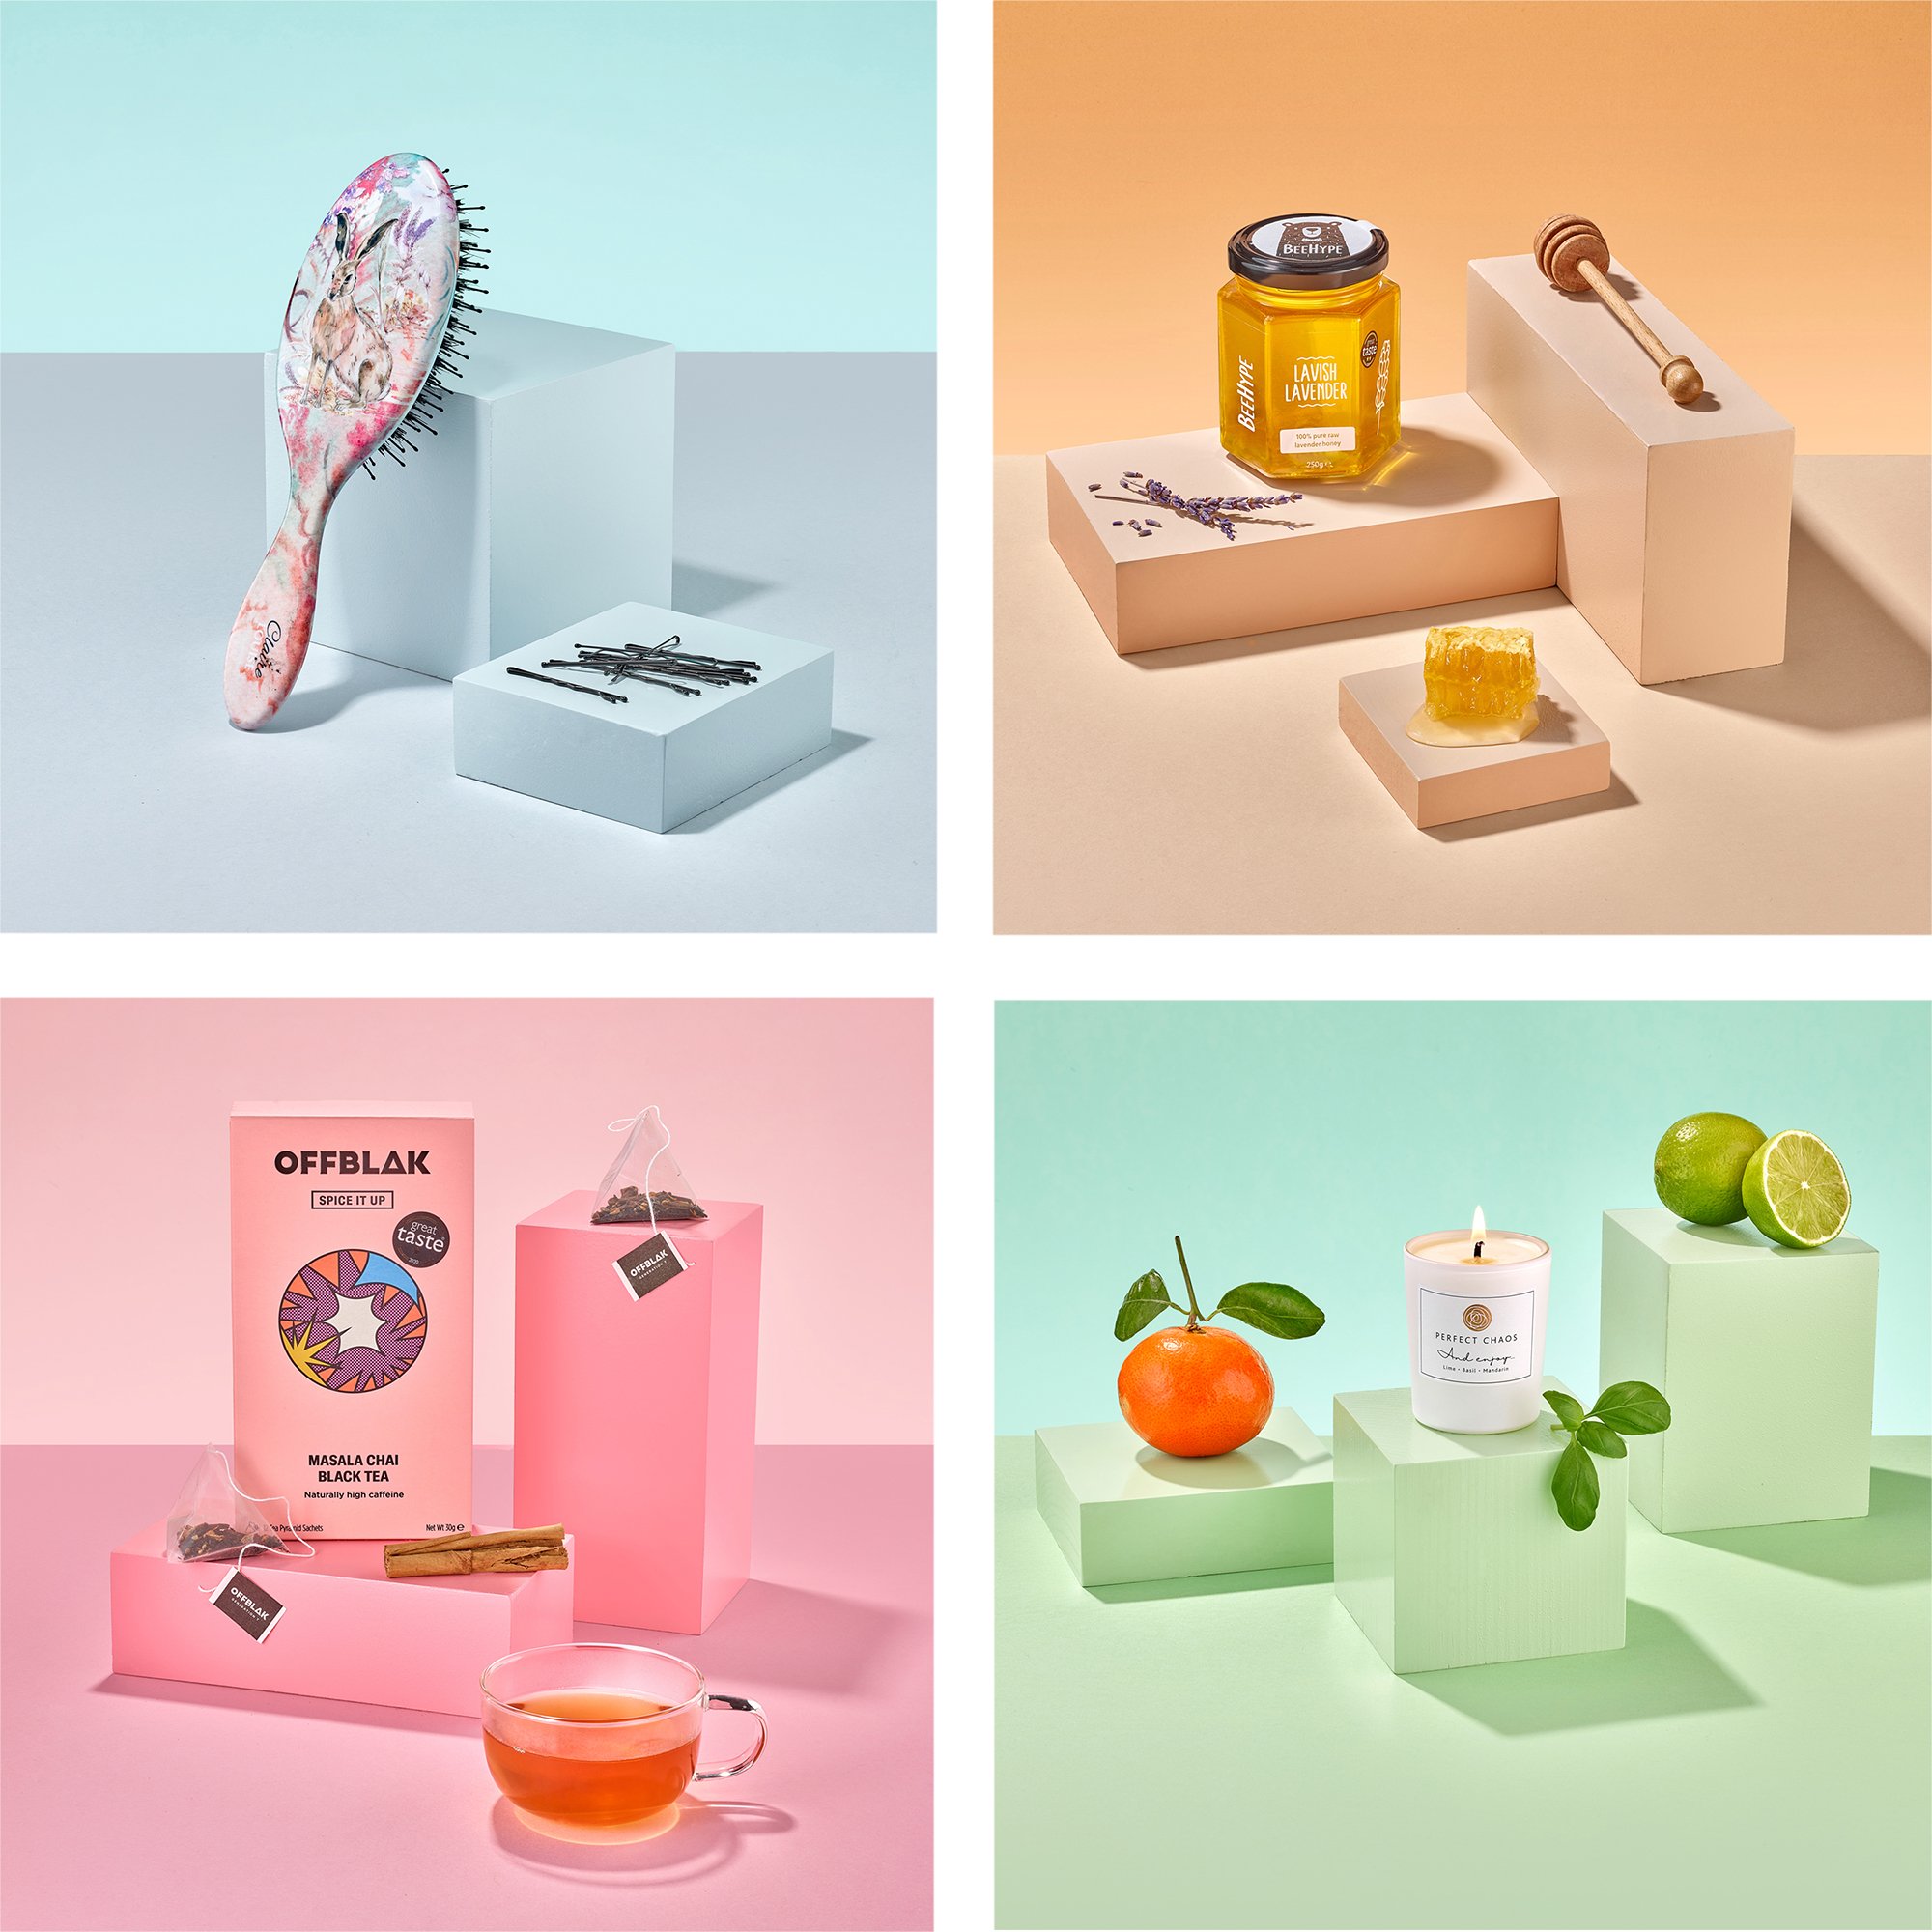 Packshot Factory - Creative Still Life Product Photography